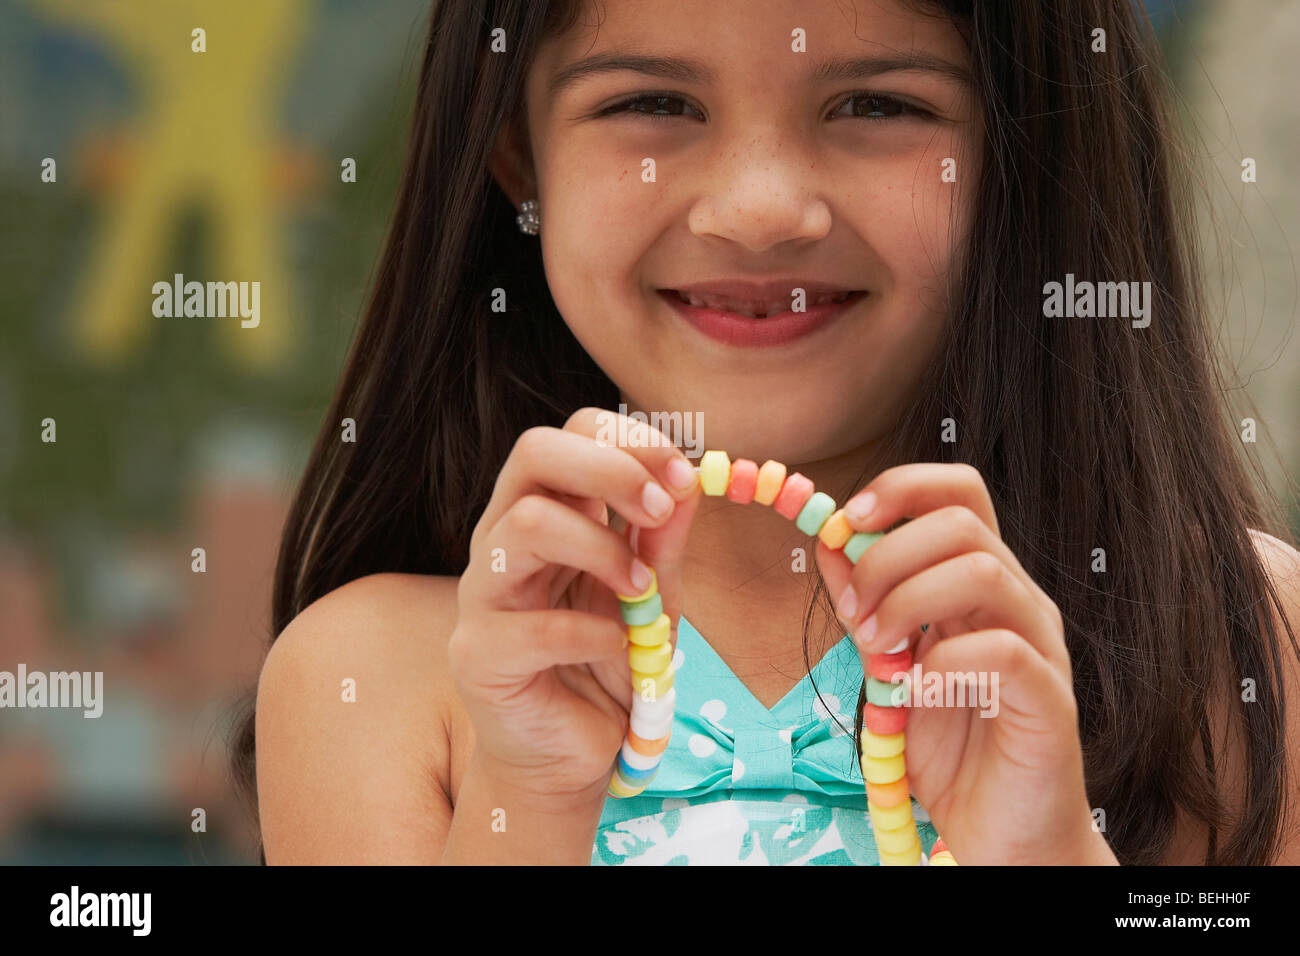 Portrait of a girl showing a candy necklace Stock Photo